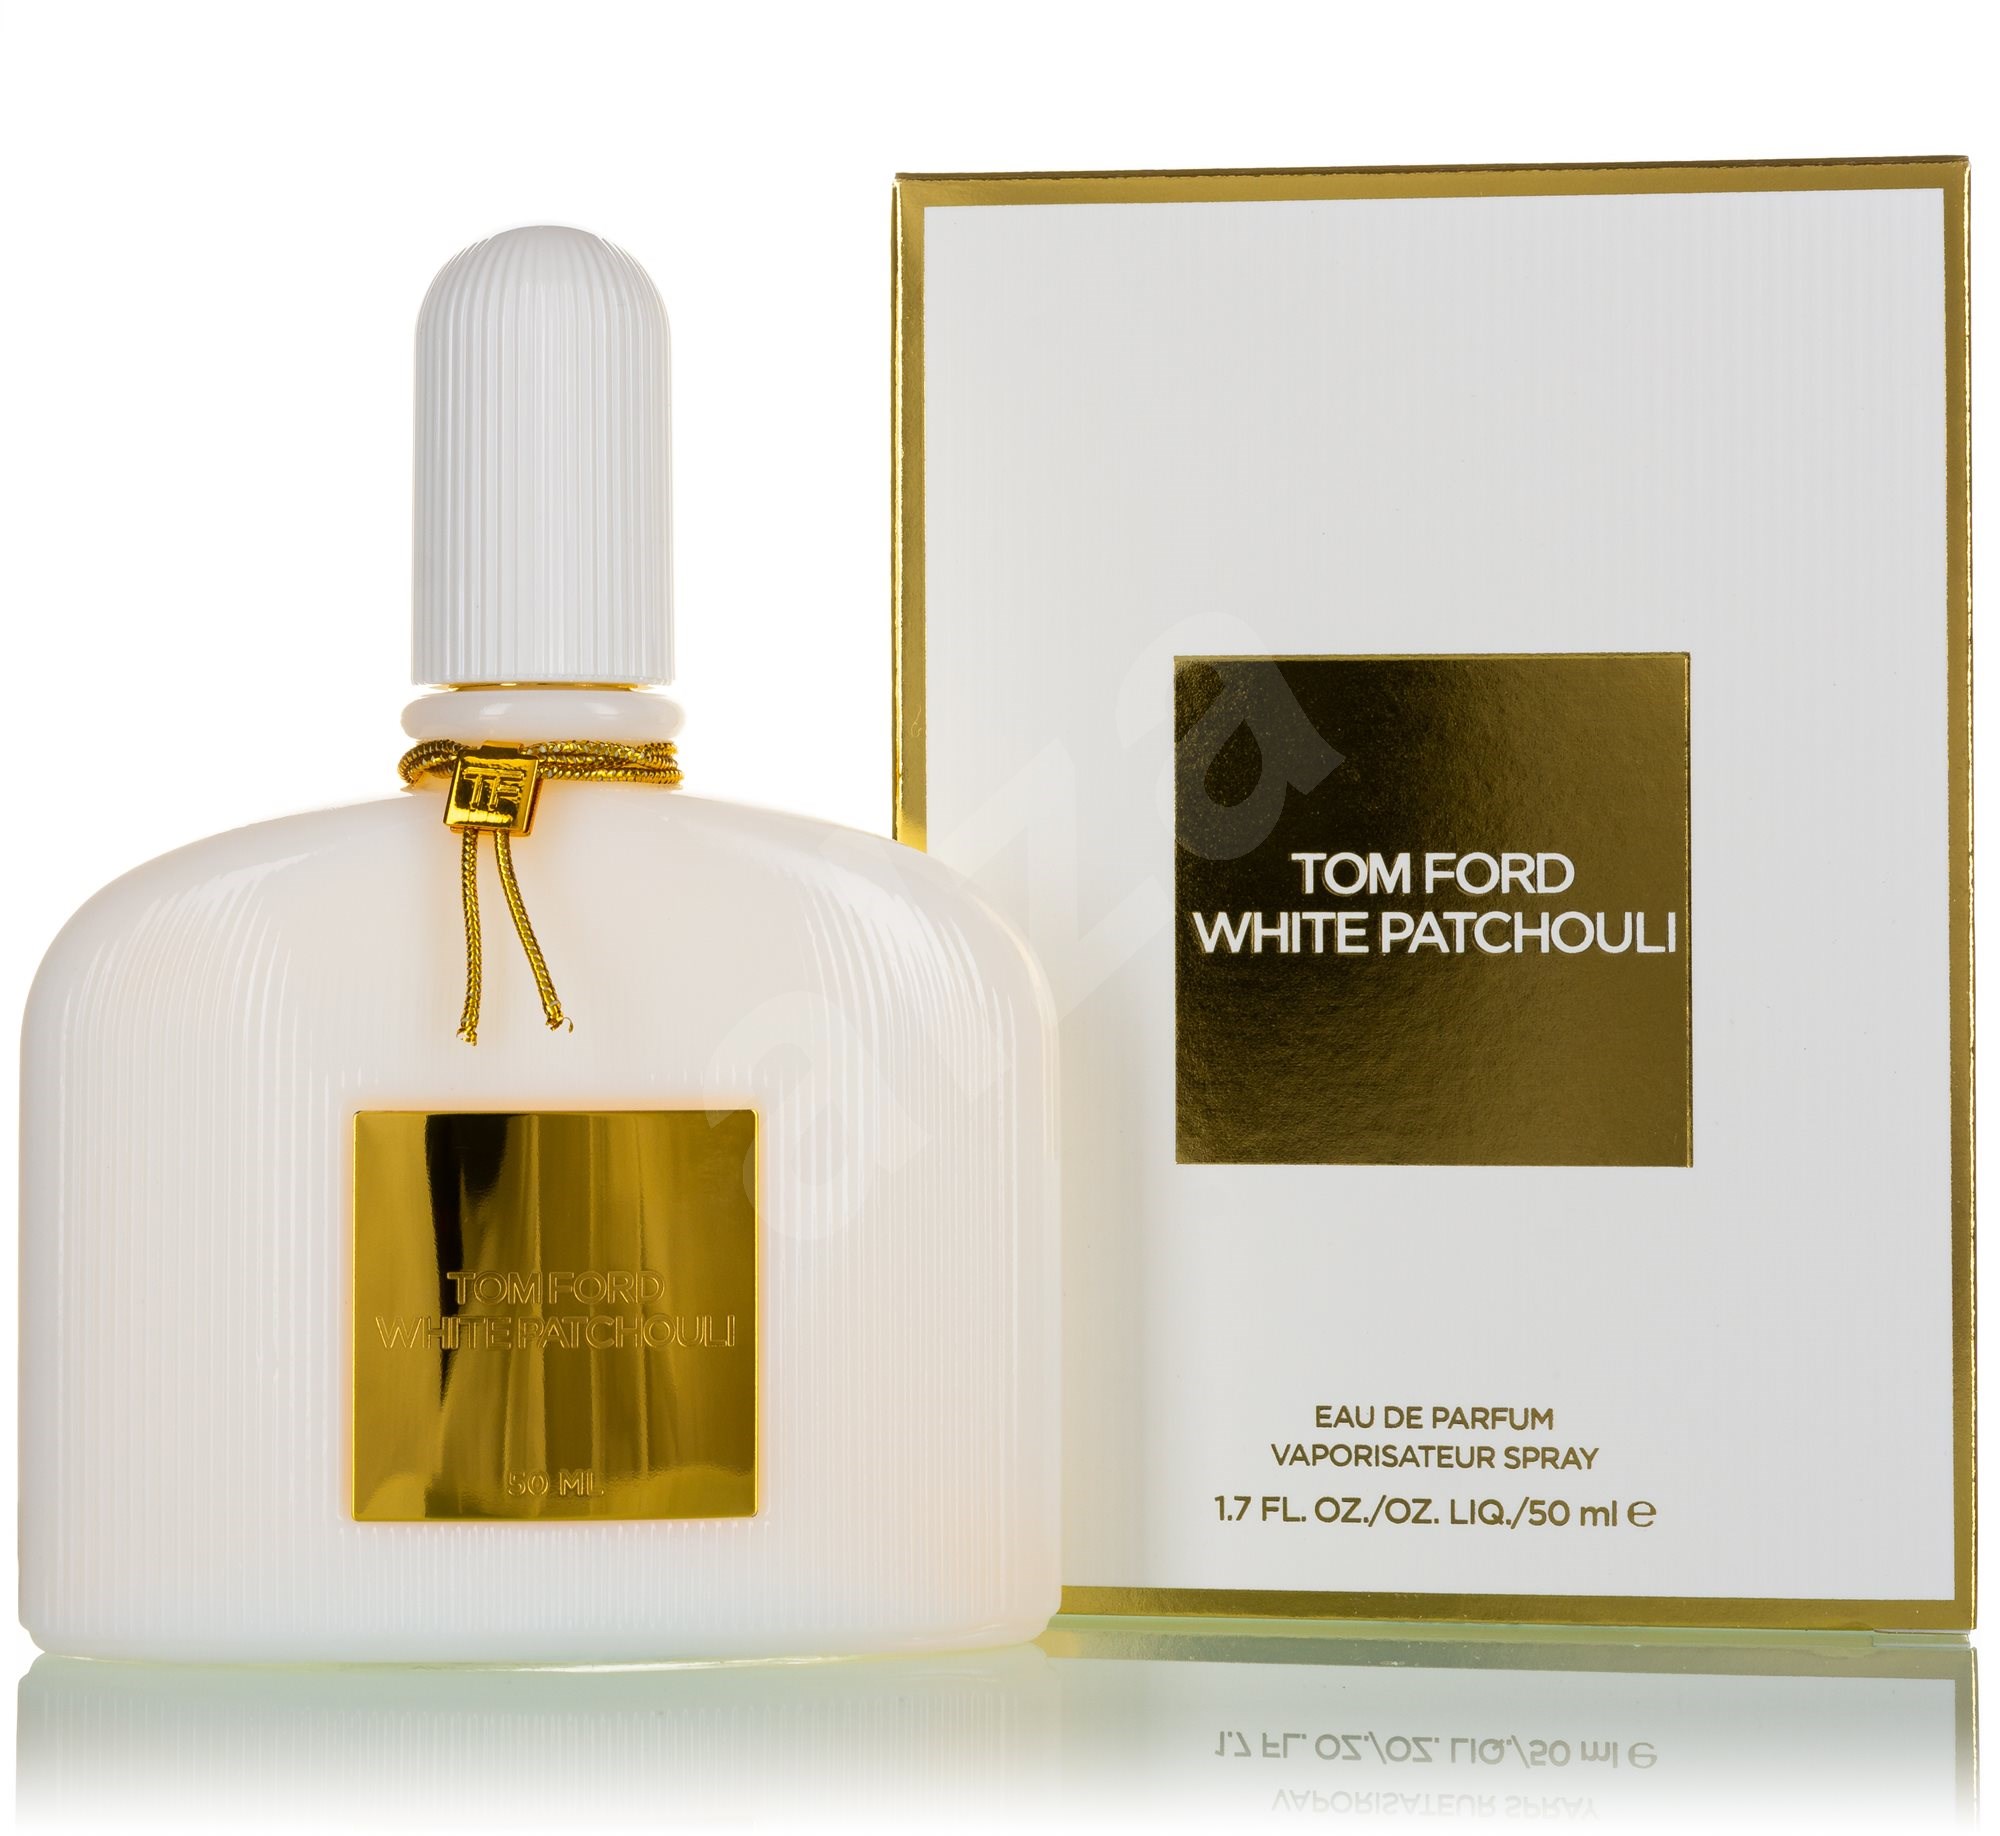 Tom ford white patchouli